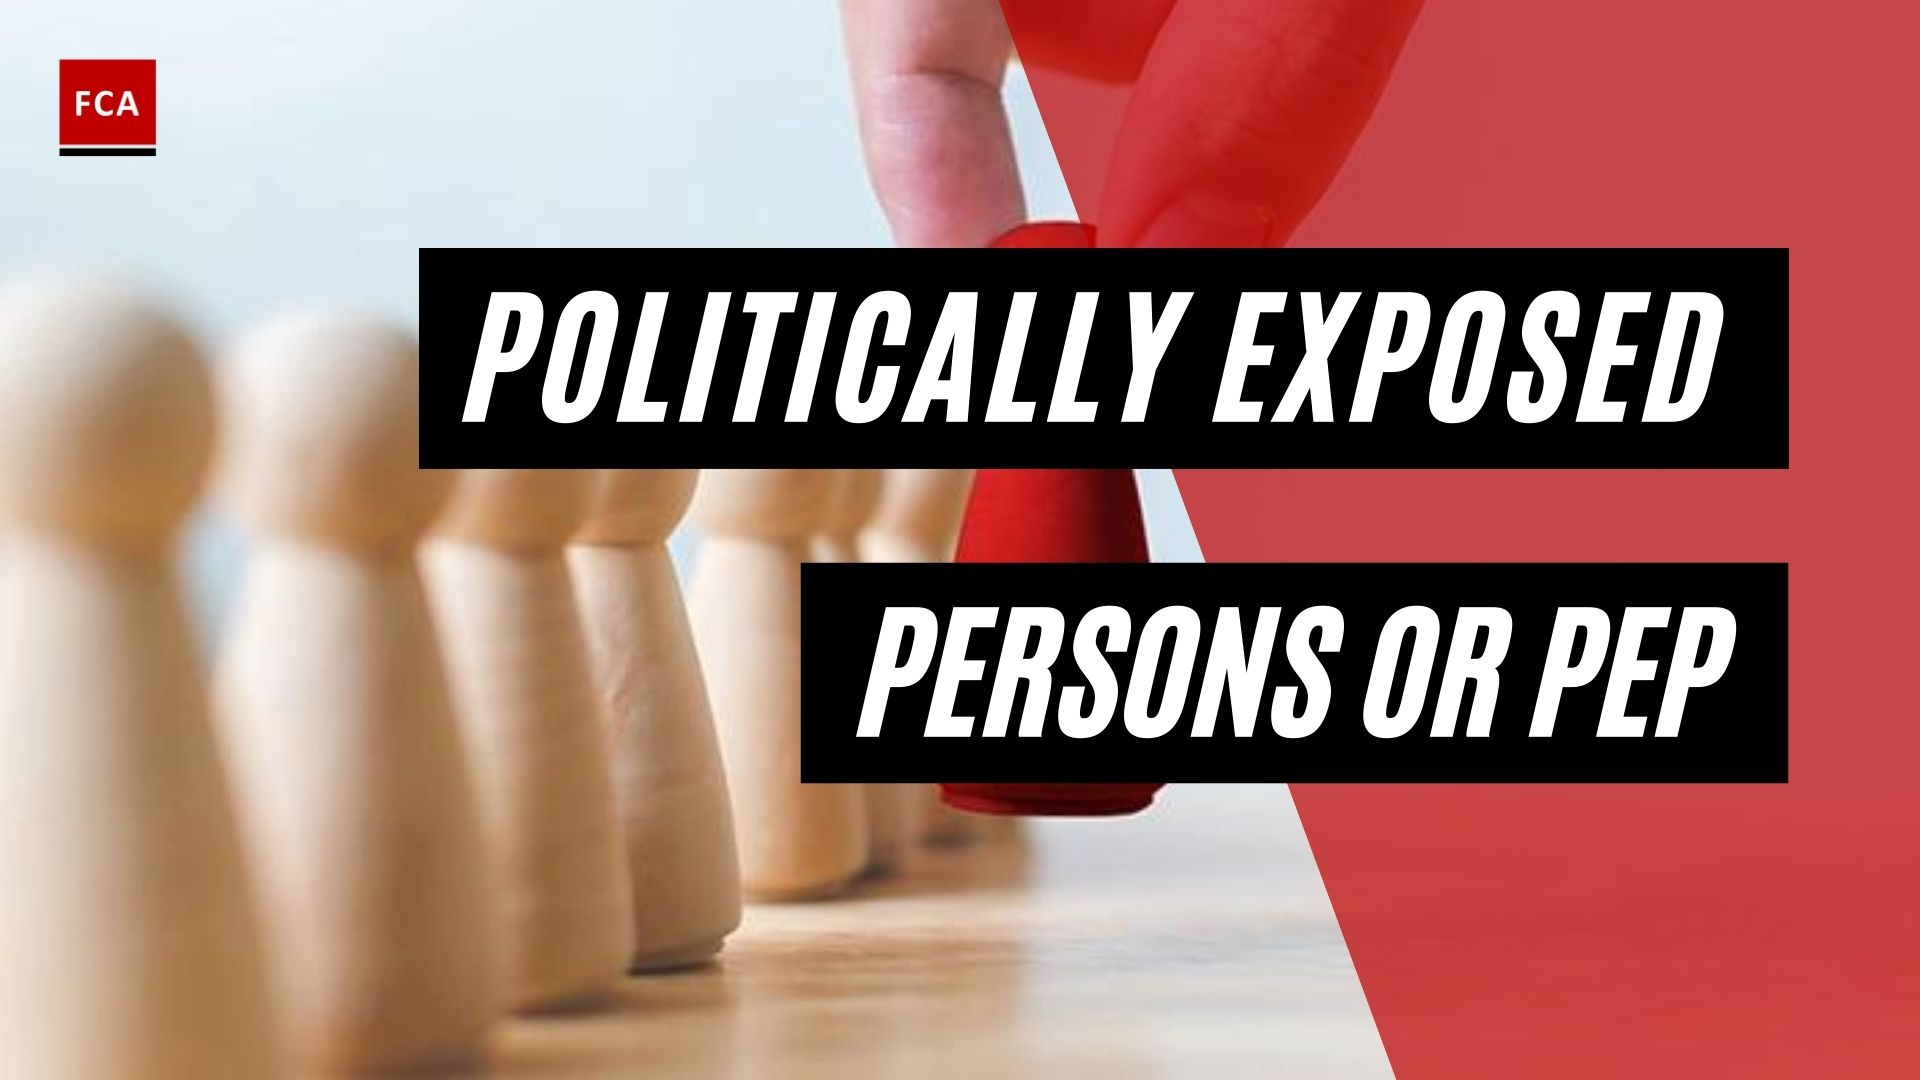 Politically Exposed Persons Or Pep